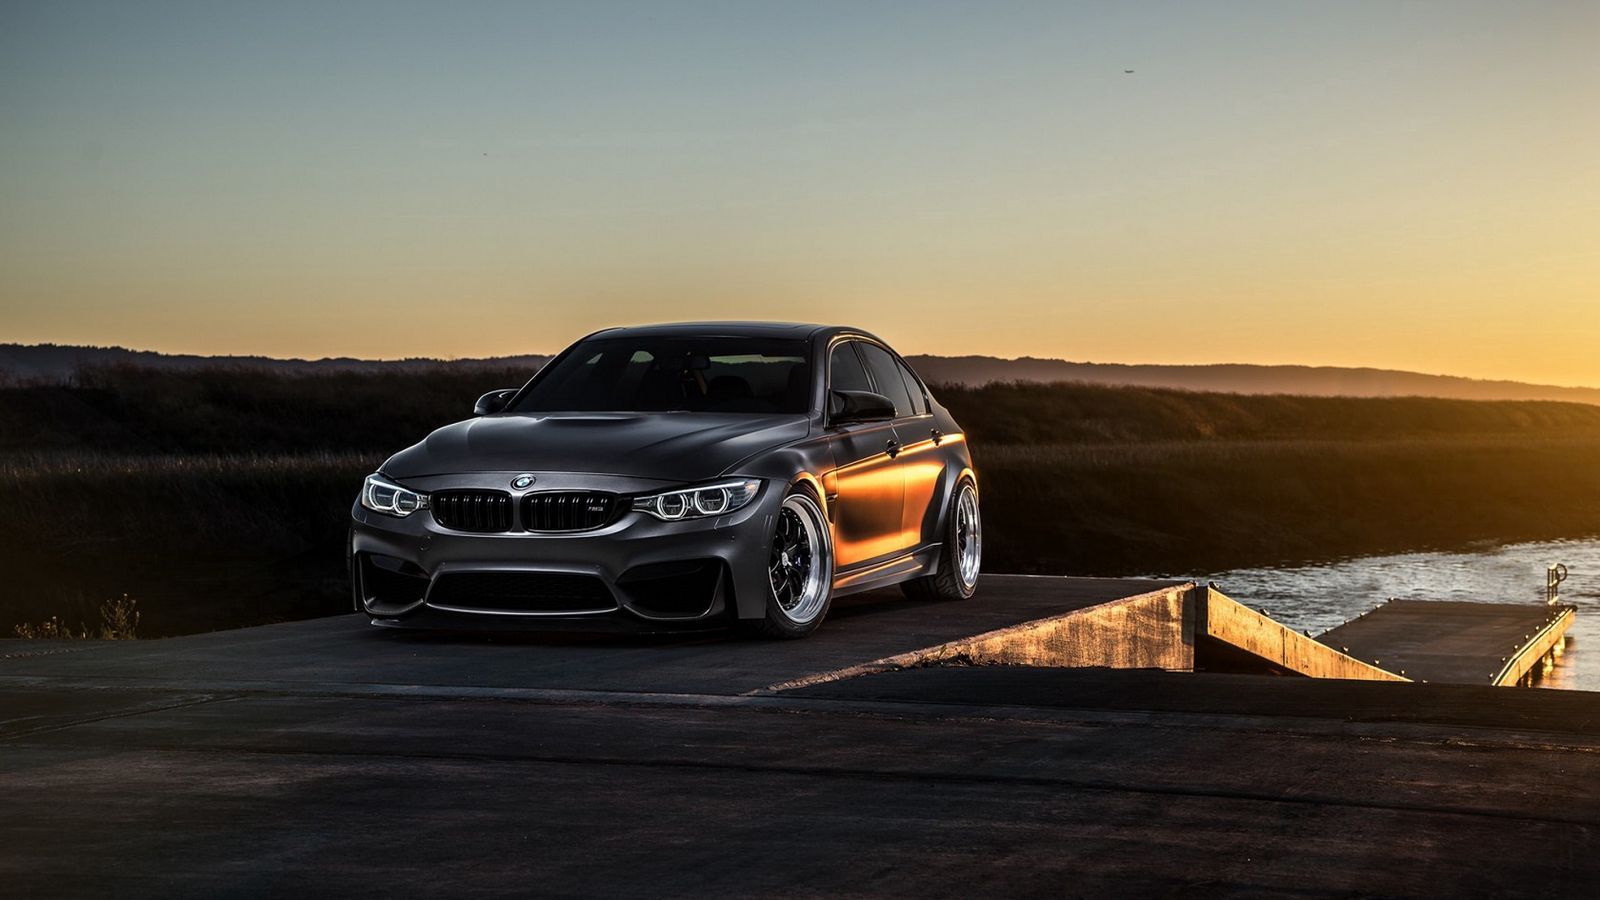 Download wallpaper 1600x900 bmw, f m front view widescreen 16:9 HD background